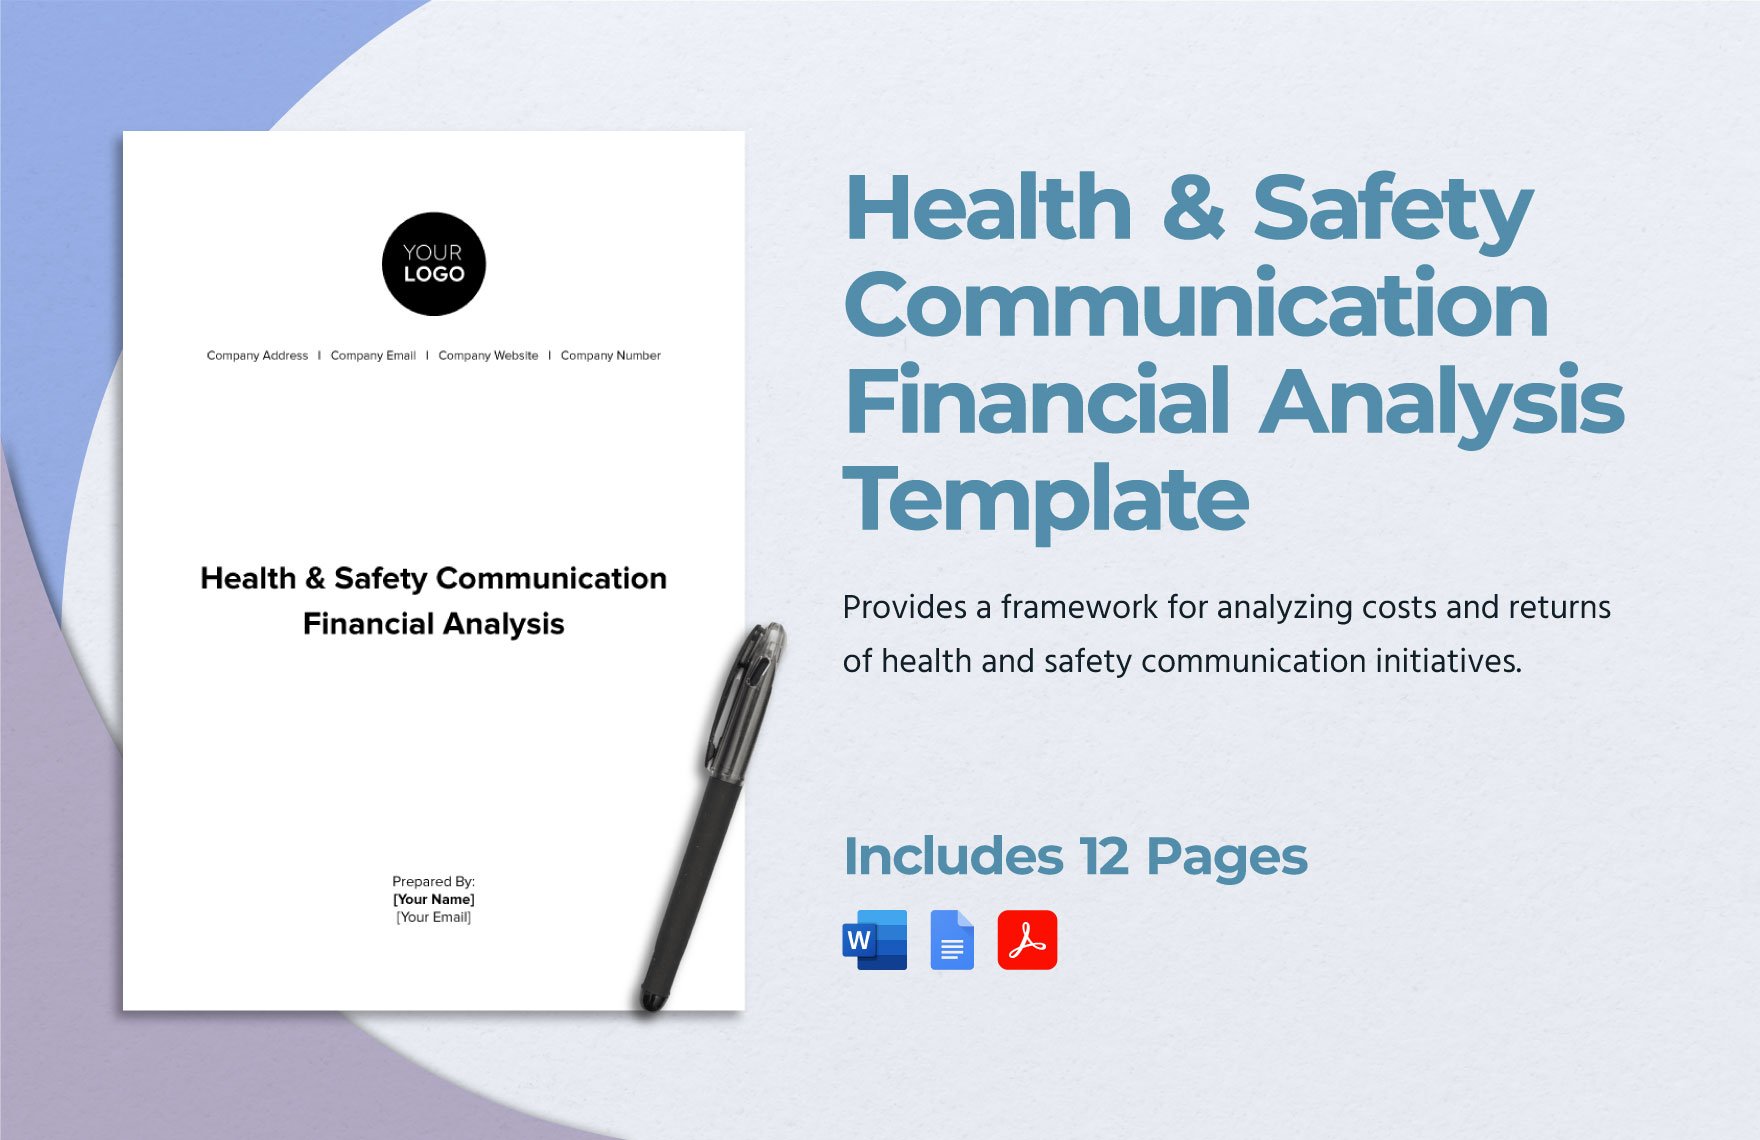 Health & Safety Communication Financial Analysis Template